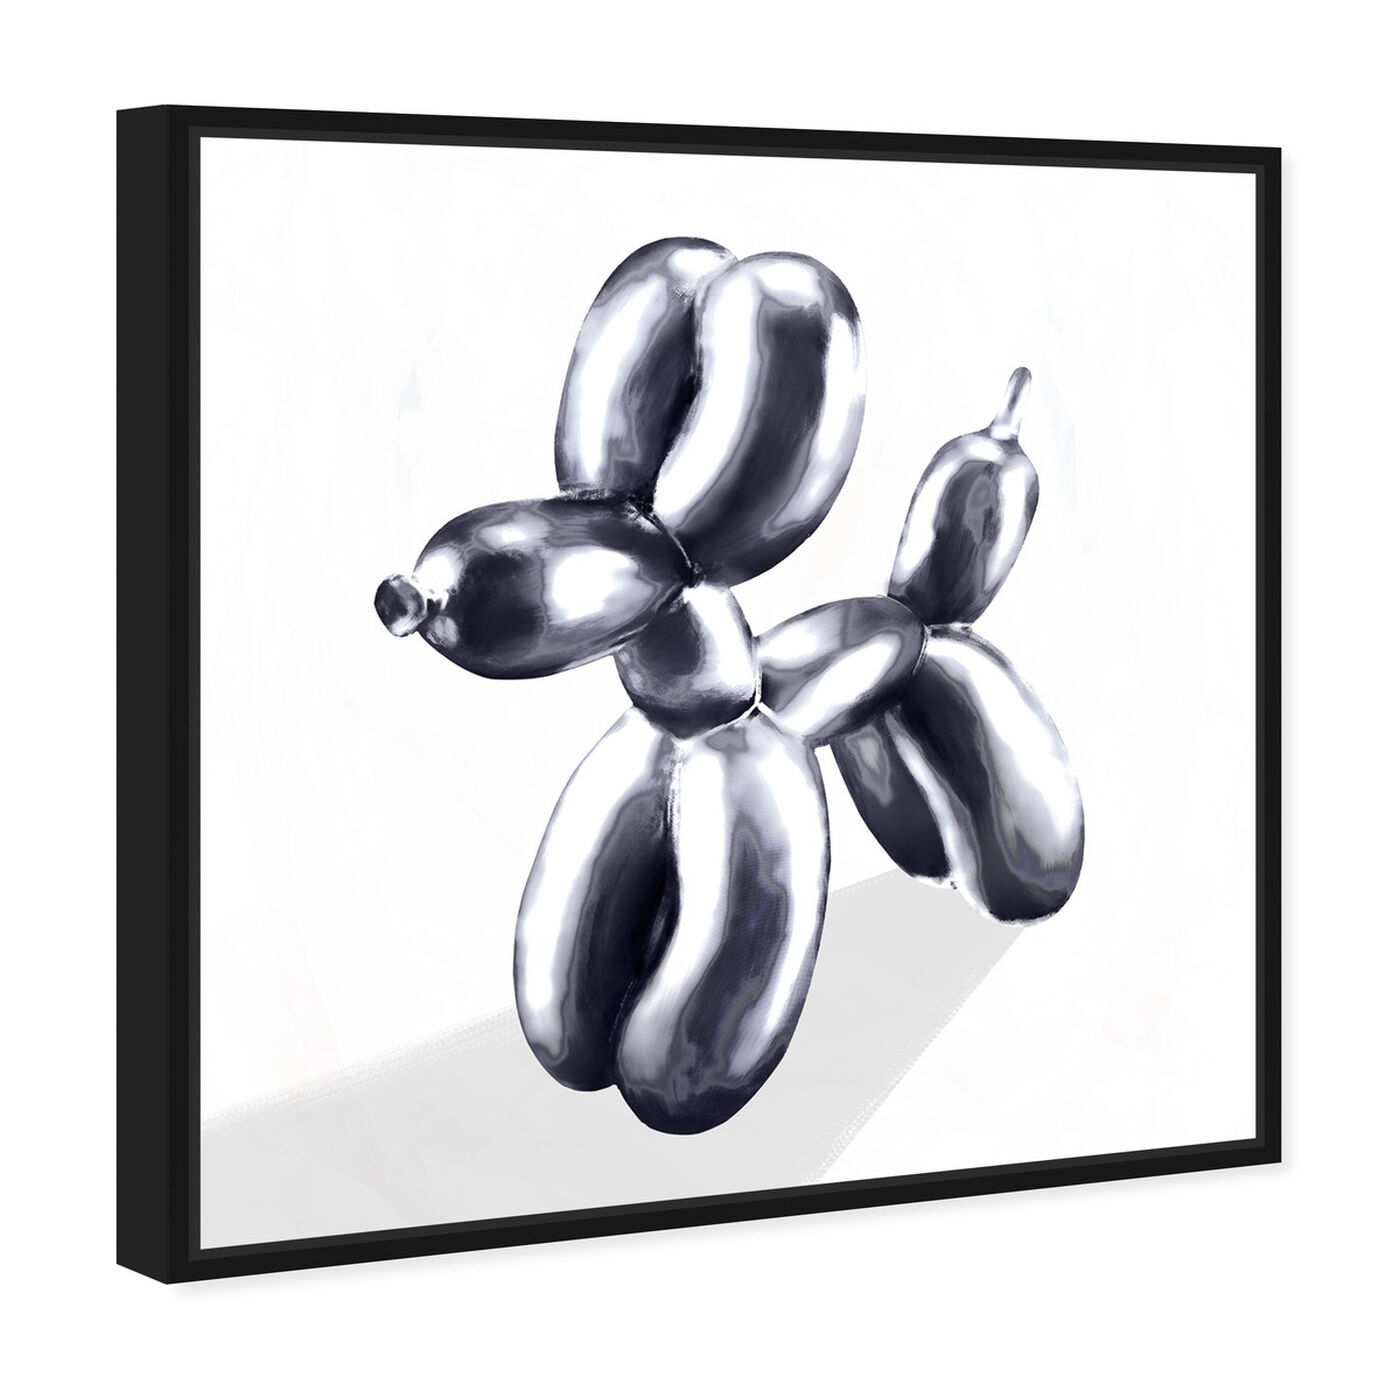 Angled view of balloon dog featuring animals and dogs and puppies art.